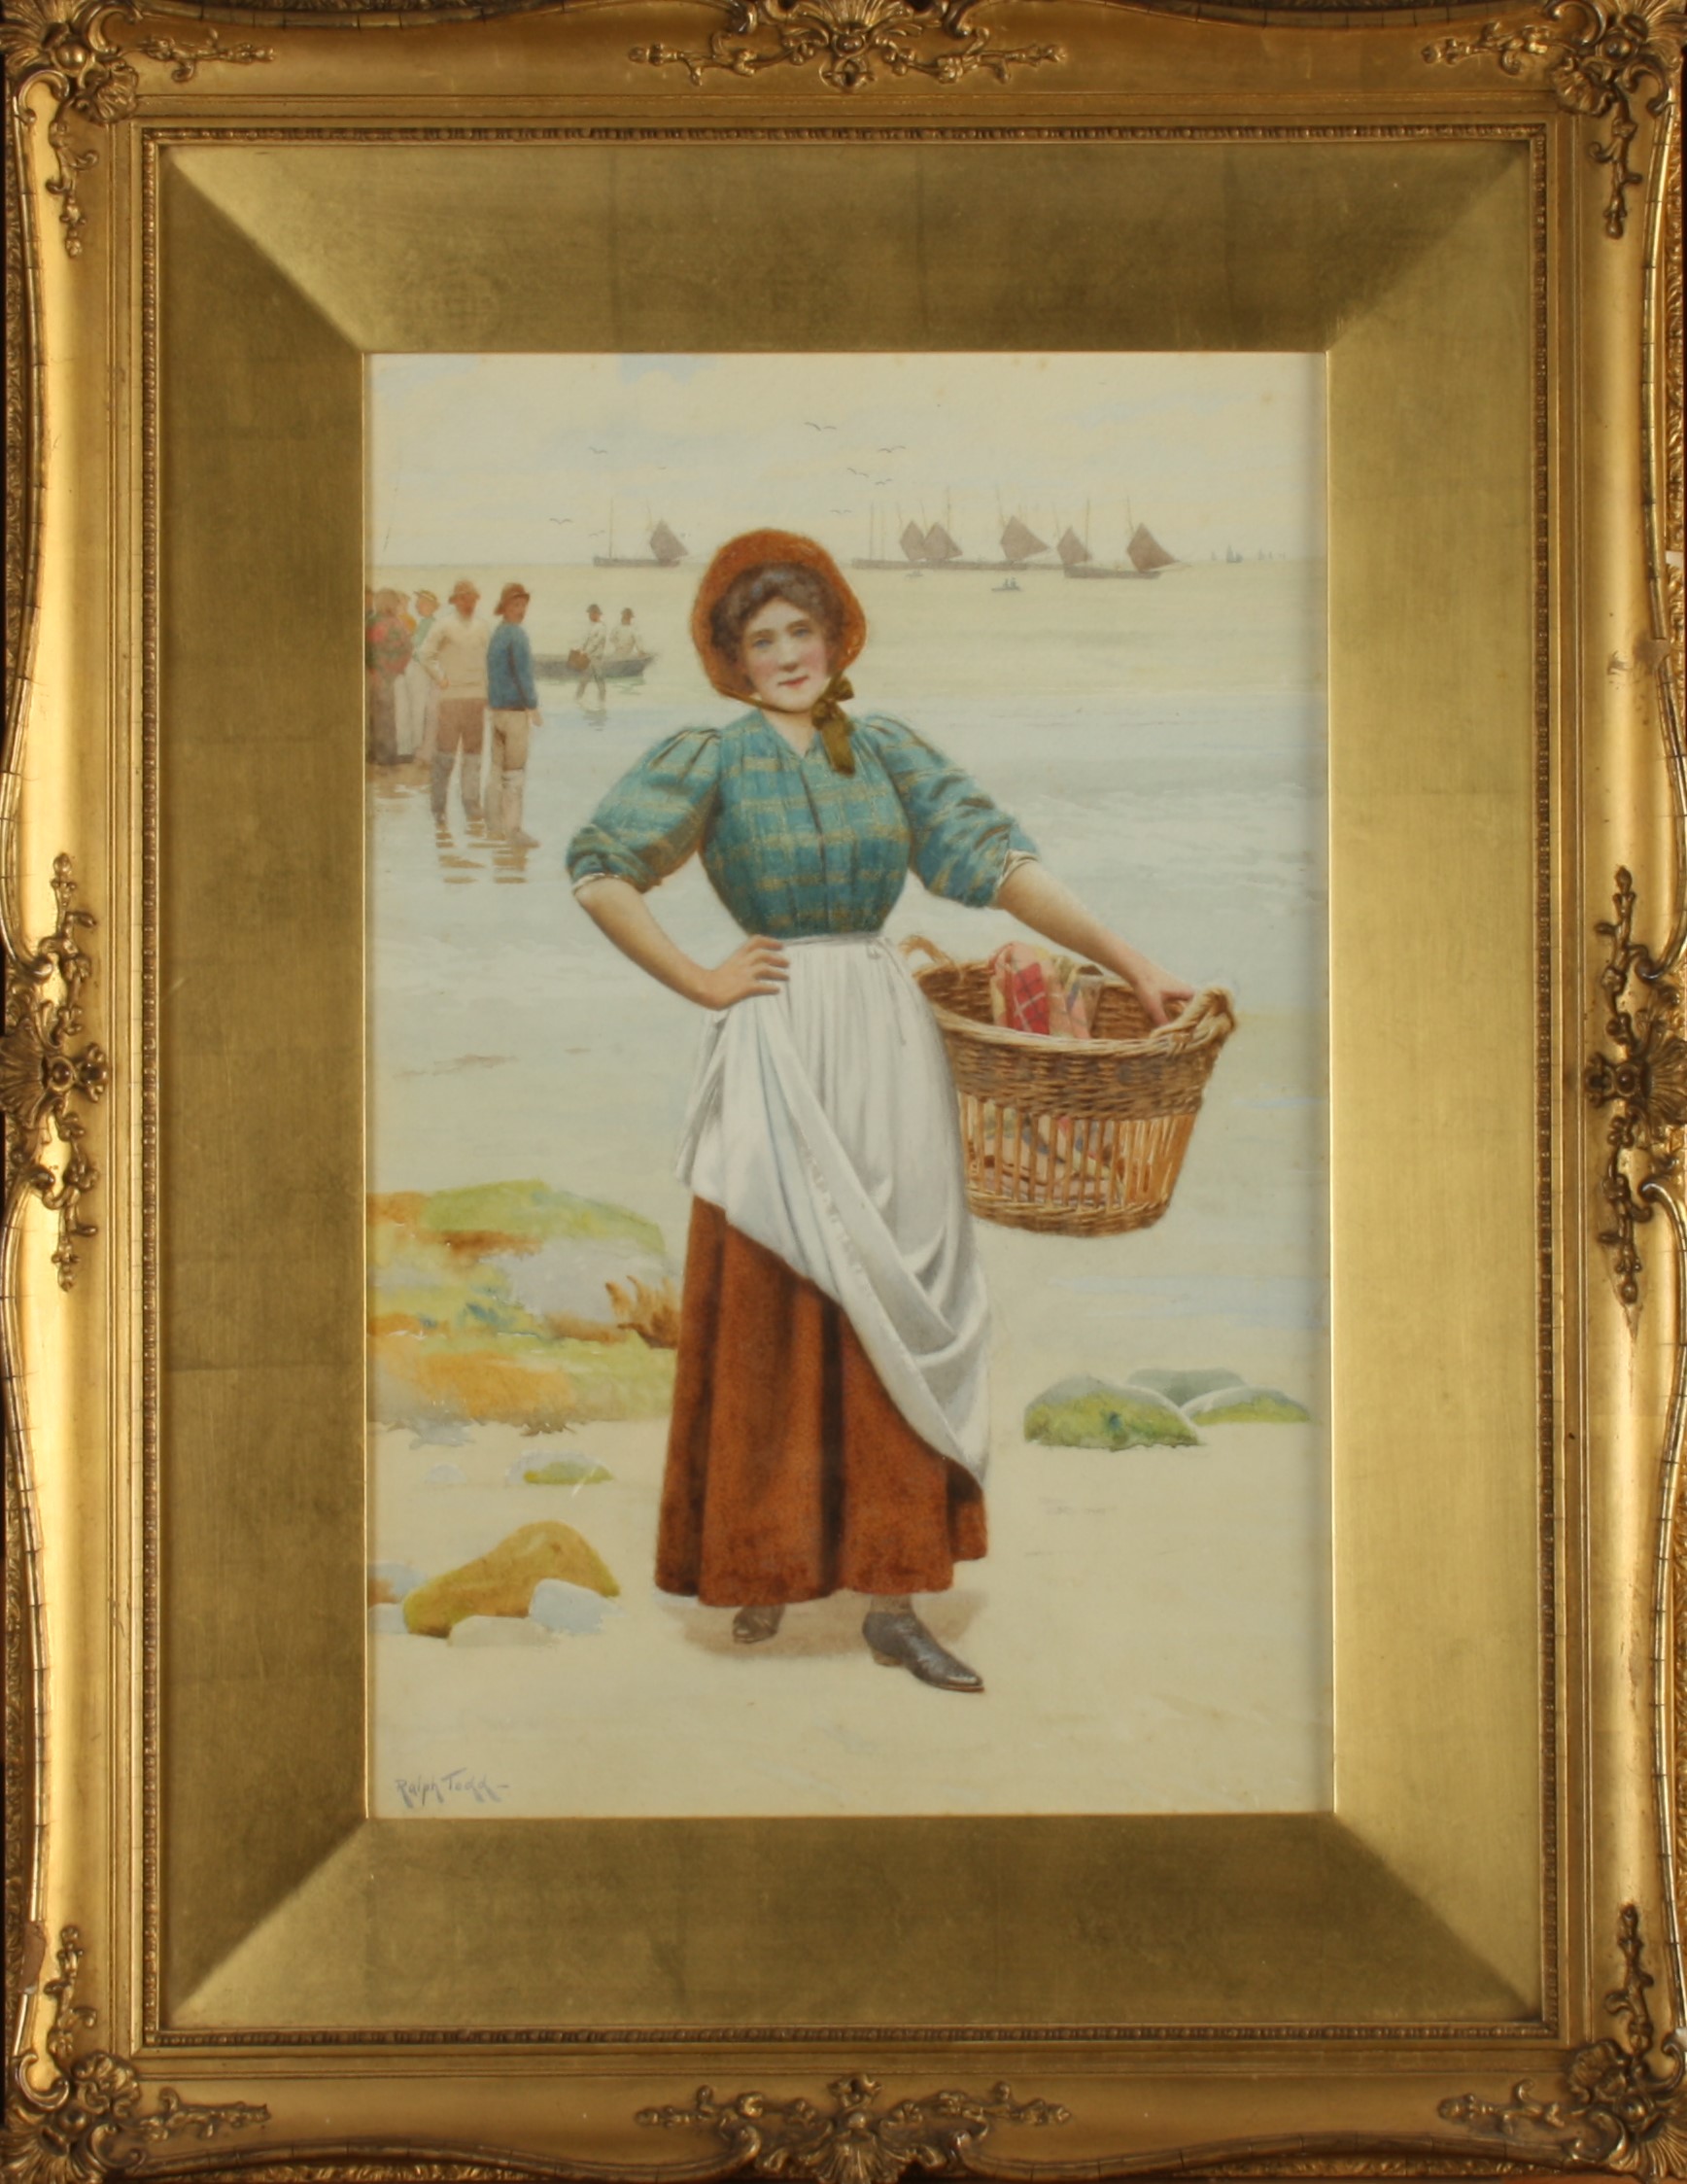 Ralph TODD A Newlyn fisher girl Watercolour Signed 38 x 25cm (See illustration) - Image 2 of 2